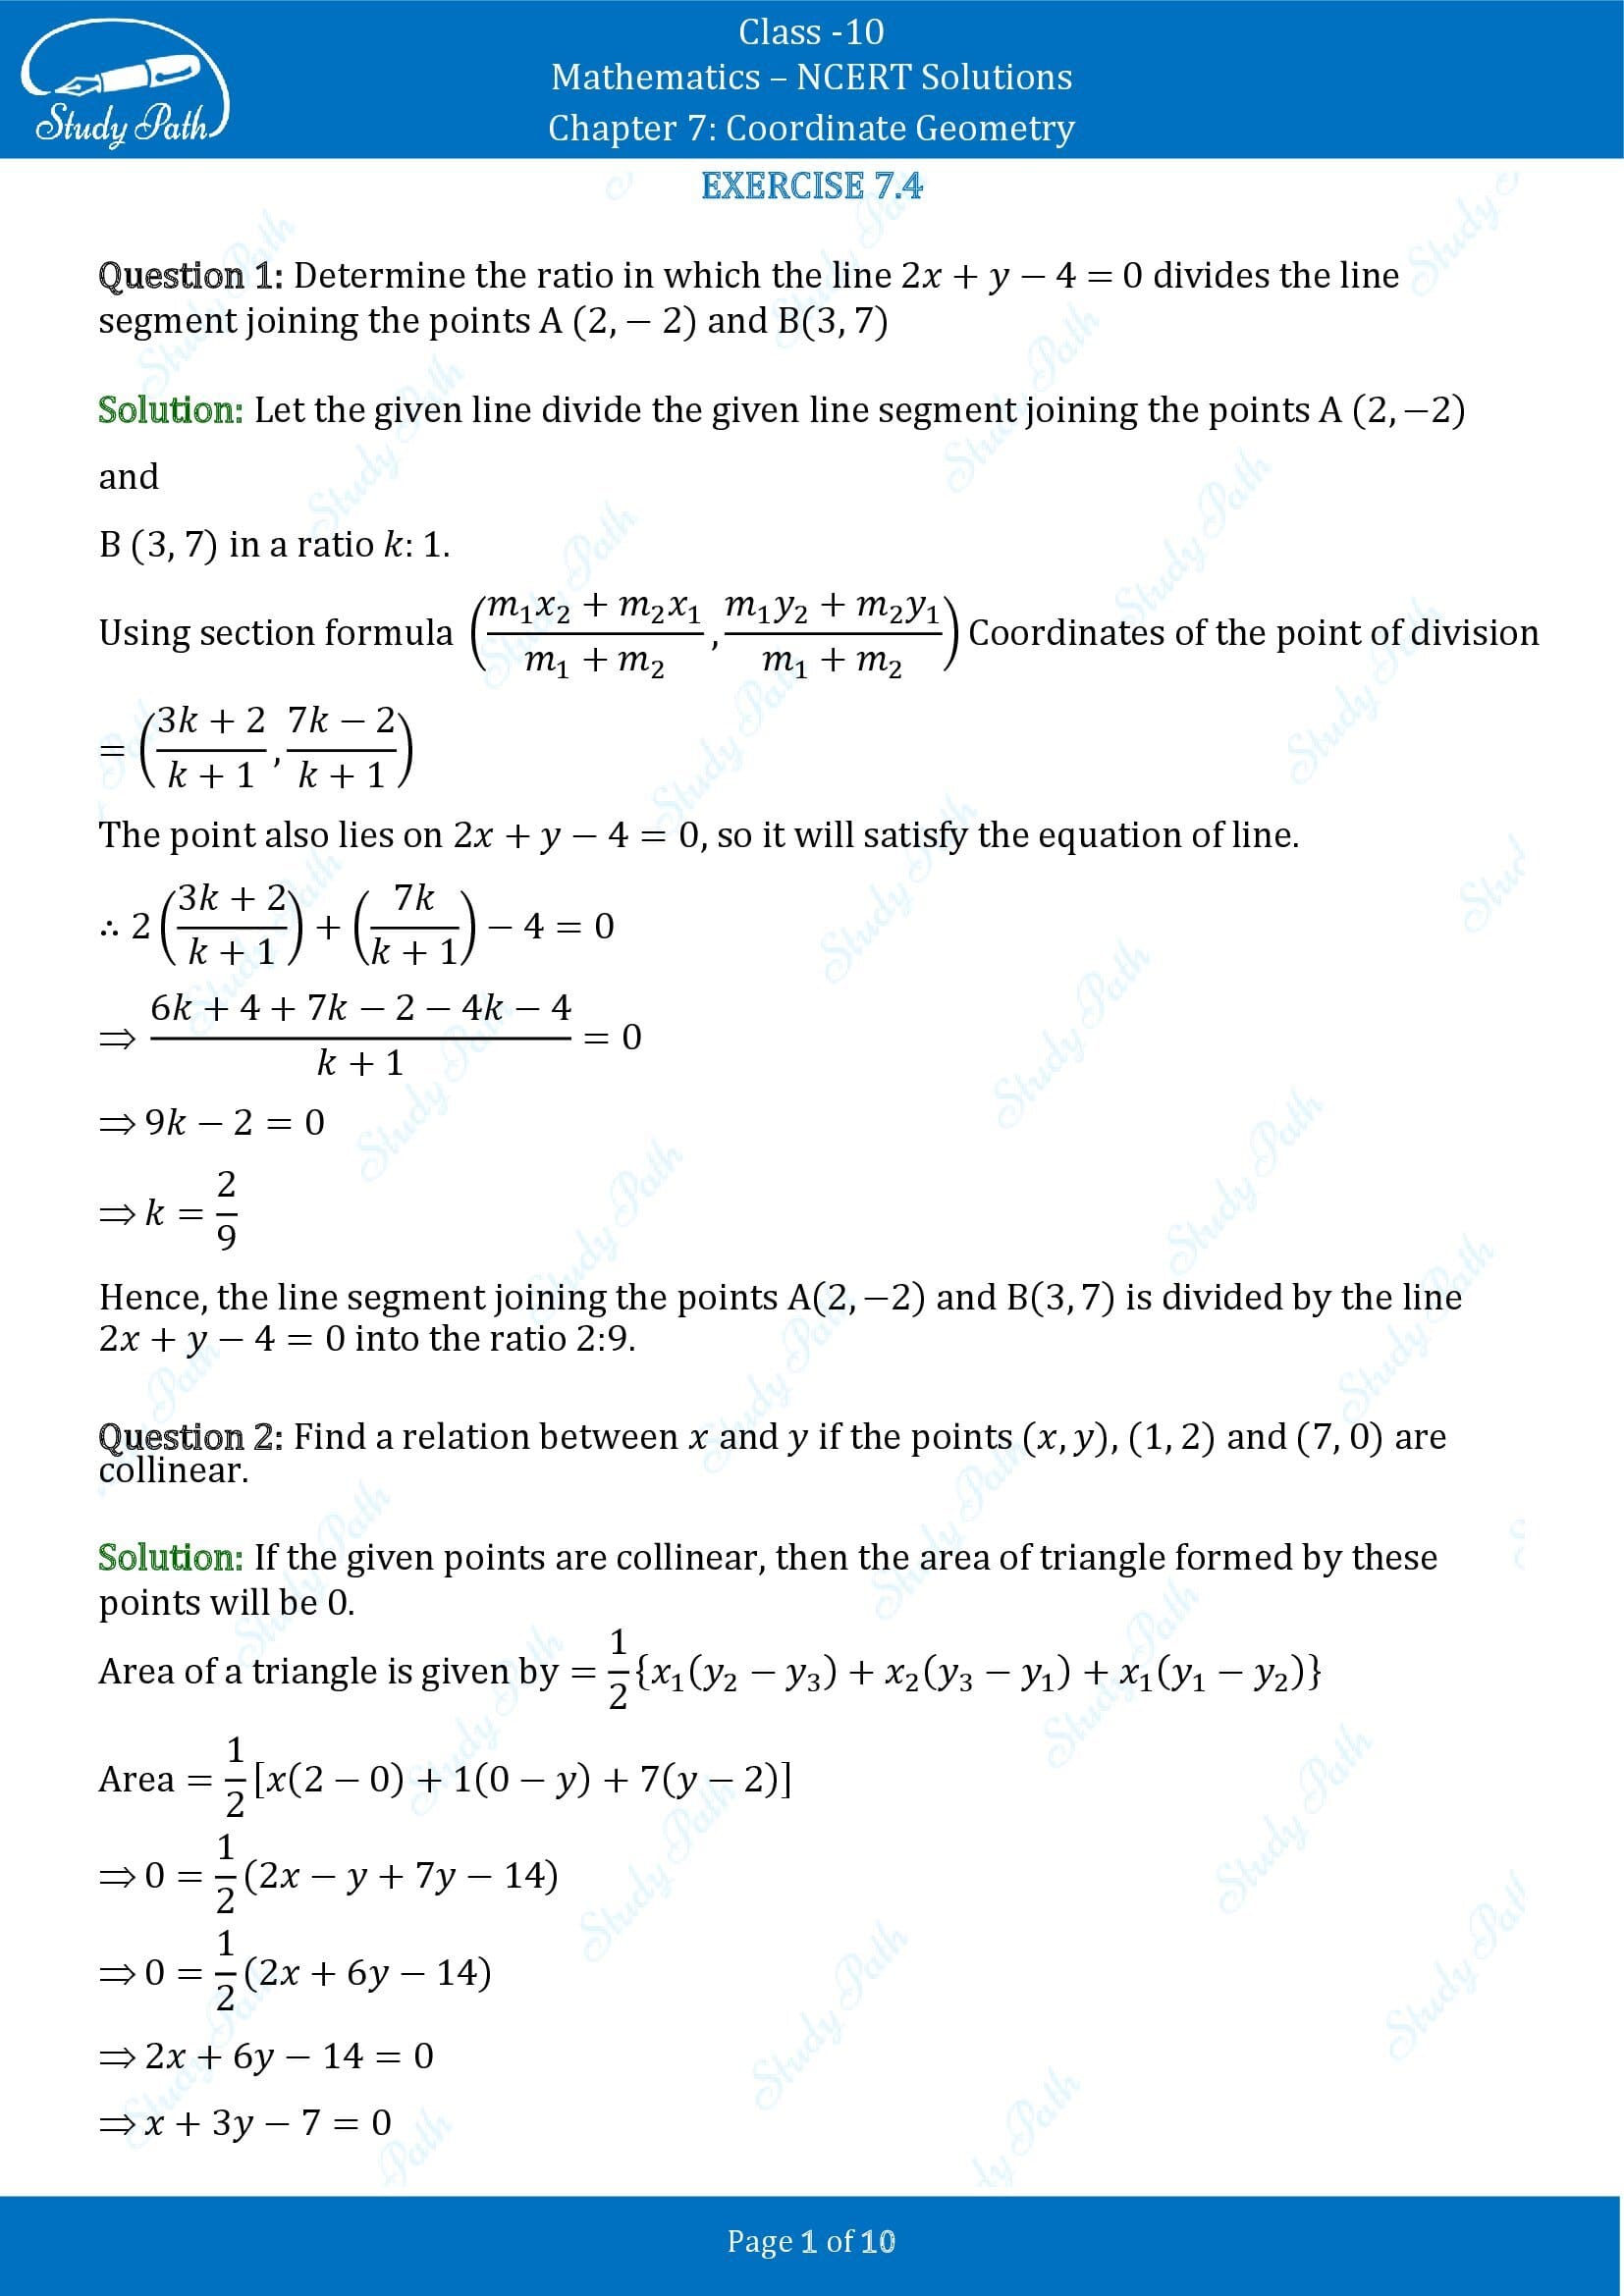 NCERT Solutions for Class 10 Maths Chapter 7 Coordinate Geometry Exercise 7.4 00001